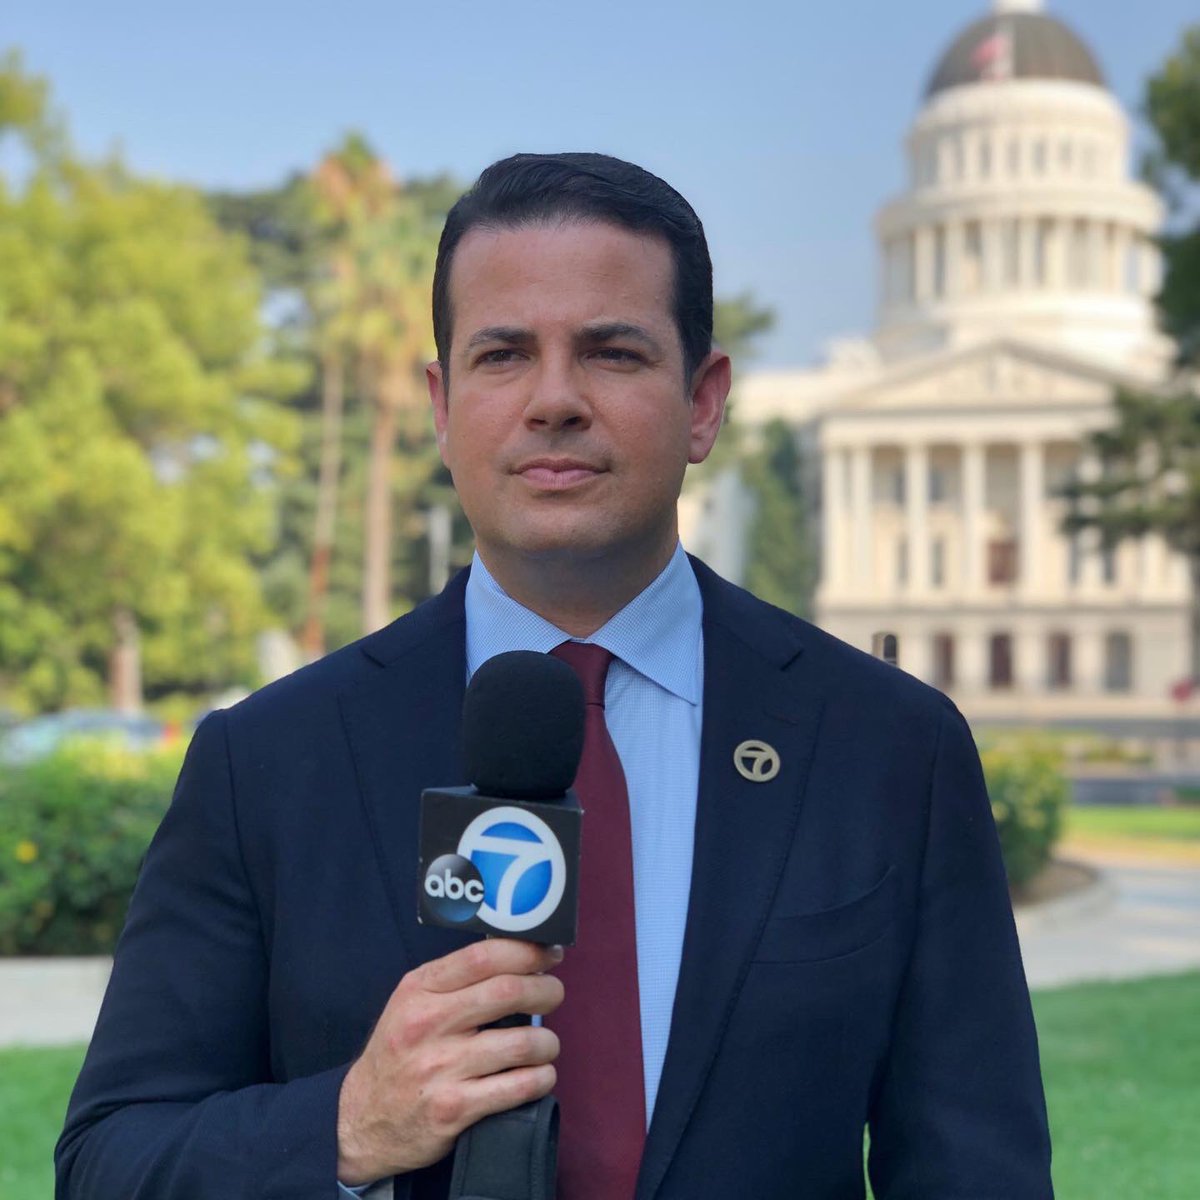 Josh Haskell on Twitter: "We'll be live all night from Sacramento covering  @GavinNewsom who is watching returns at home with his family. The Governor  may speak later tonight. Stay with @ABC7 for